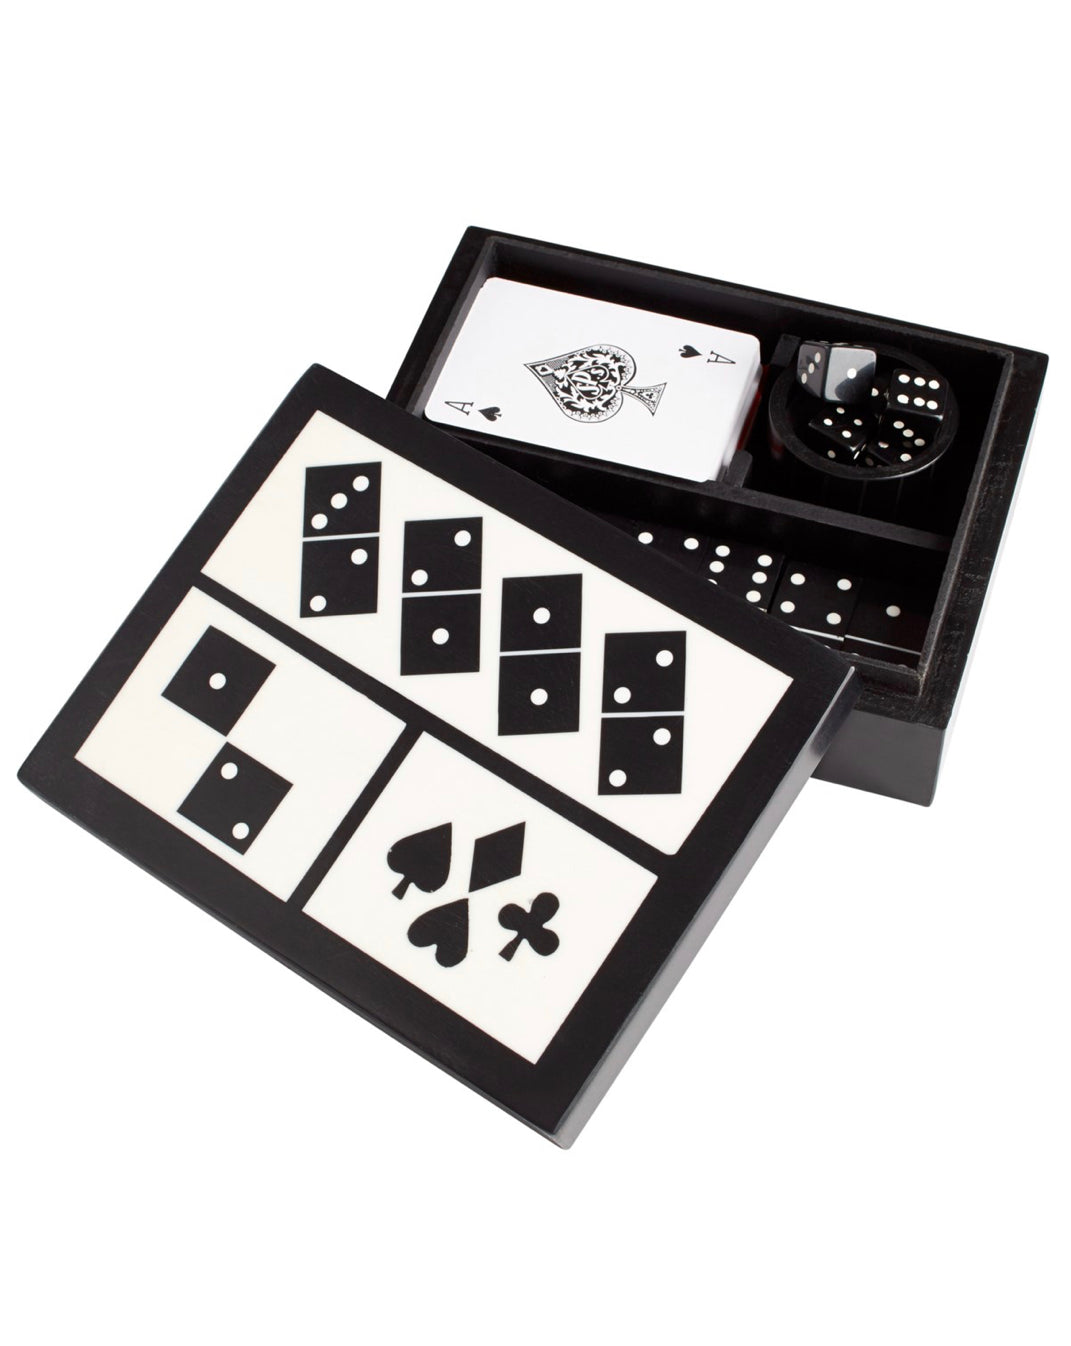  Up your game night style when displaying this gorgeously detailed sculpture. Cards, dice, and dominoes rest in this black and white box piece elevating an eclectic den or game room.  Dimensions: H 2.25 x W 7.25 x Depth 6  Finish: Black and White Materials: Resin